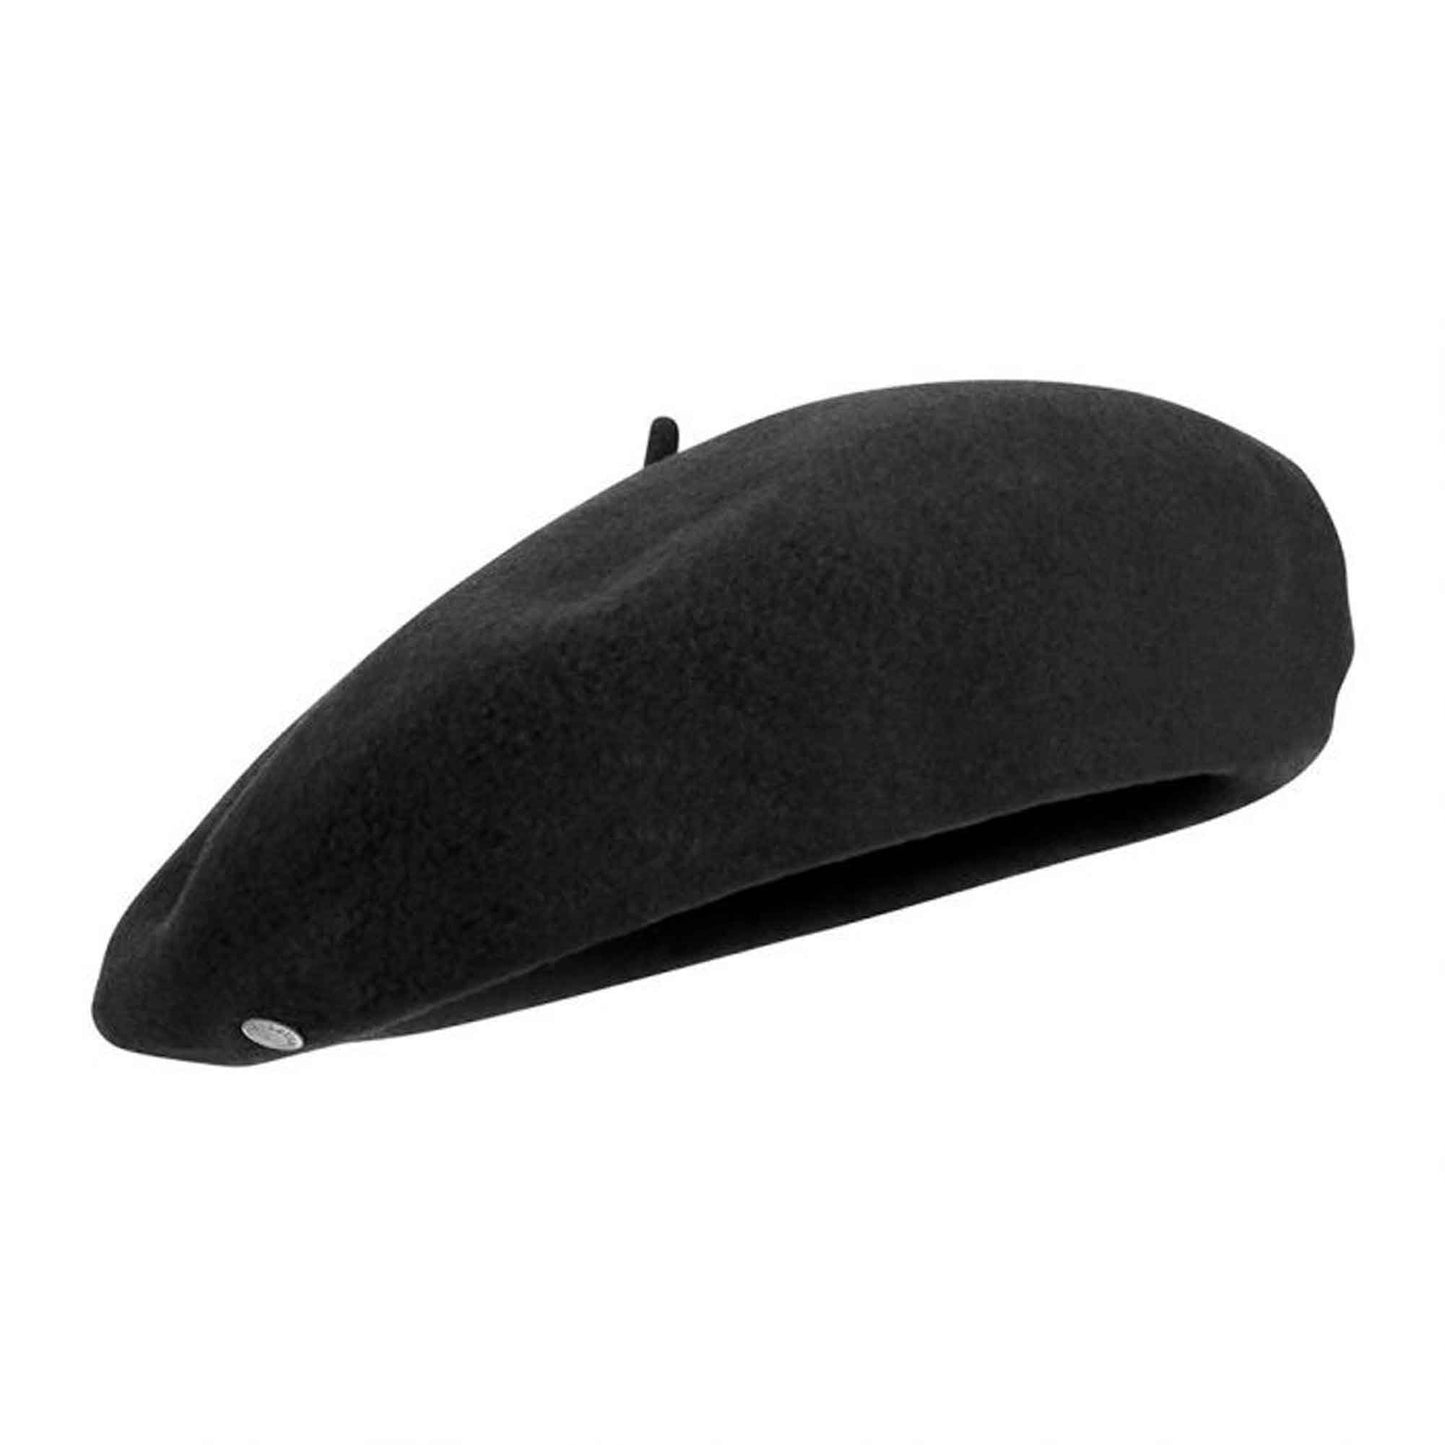 Laulhere Campan 10" french anglobasque wool beret